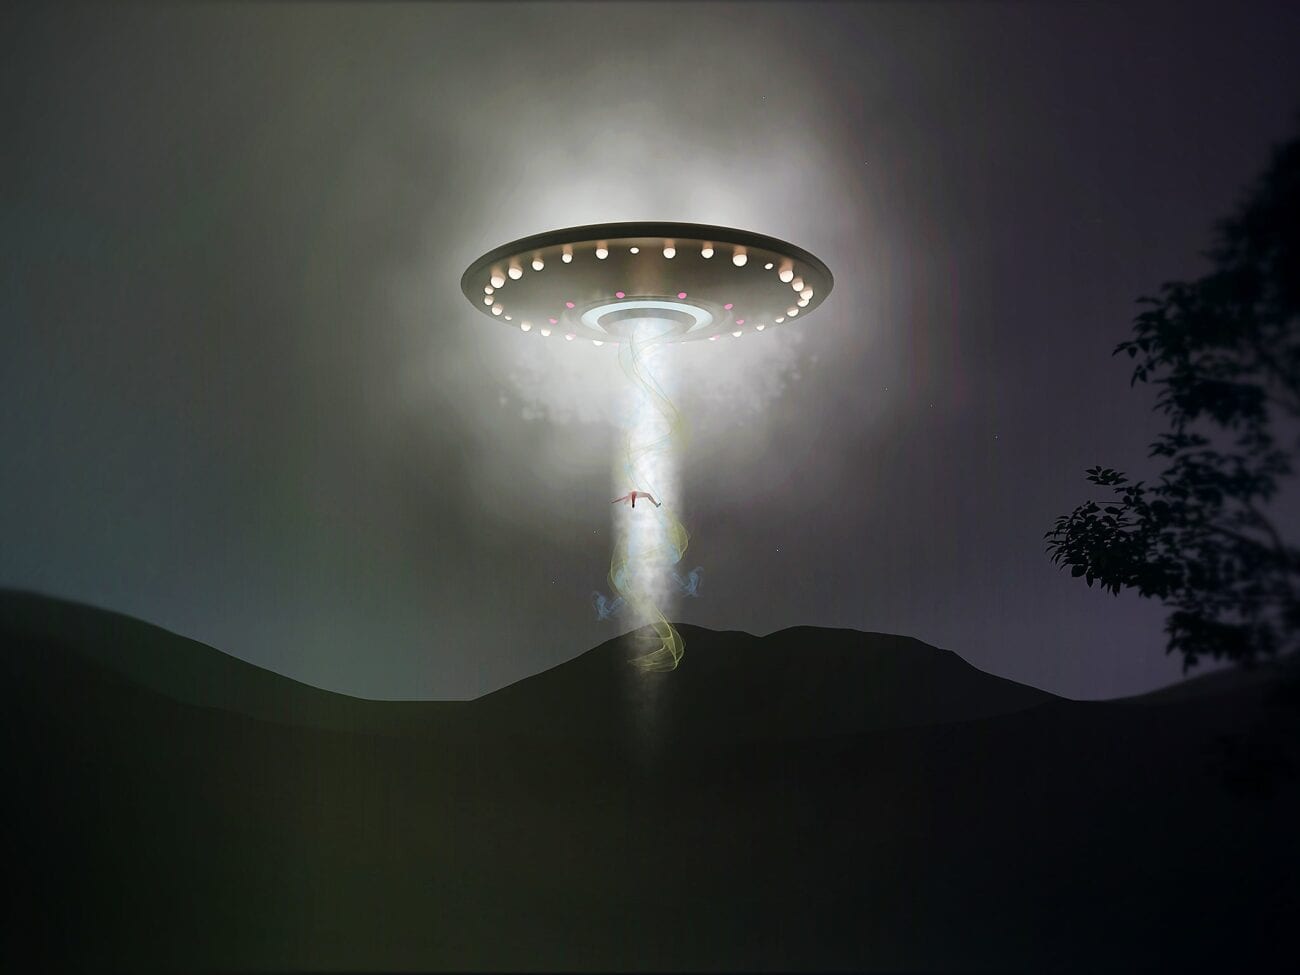 For as long as there have been stories of UFOs, there have been stories of alien abductions. Here are some of the craziest abduction stories.